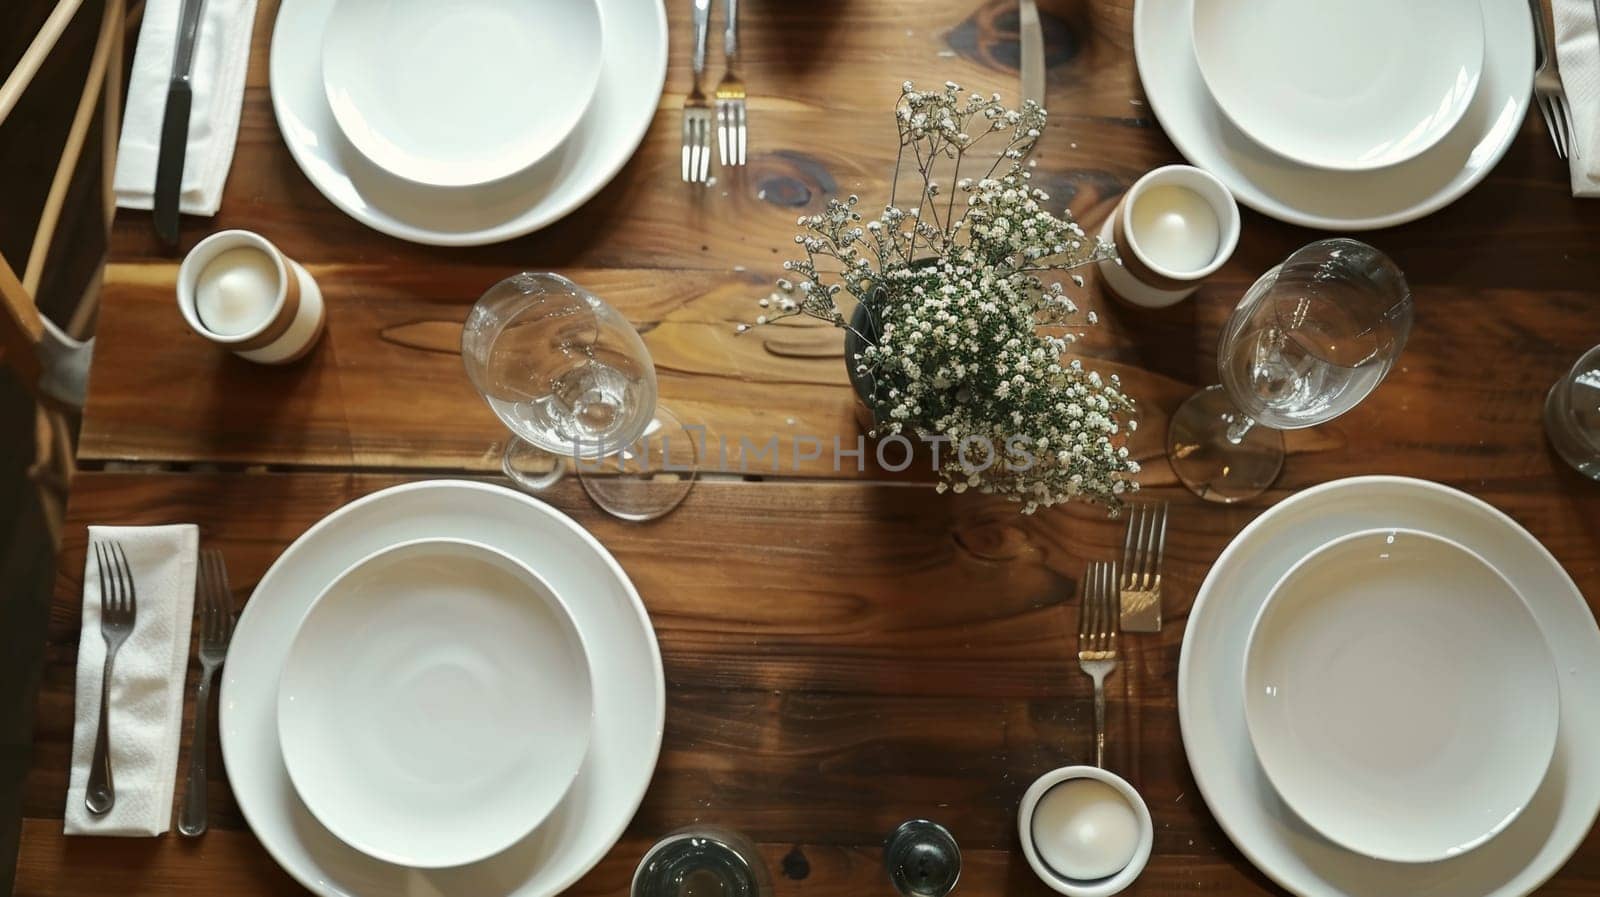 Elegant table setting featuring white plates and gypsophila centerpiece on a wooden table, perfect for intimate gatherings. by sfinks